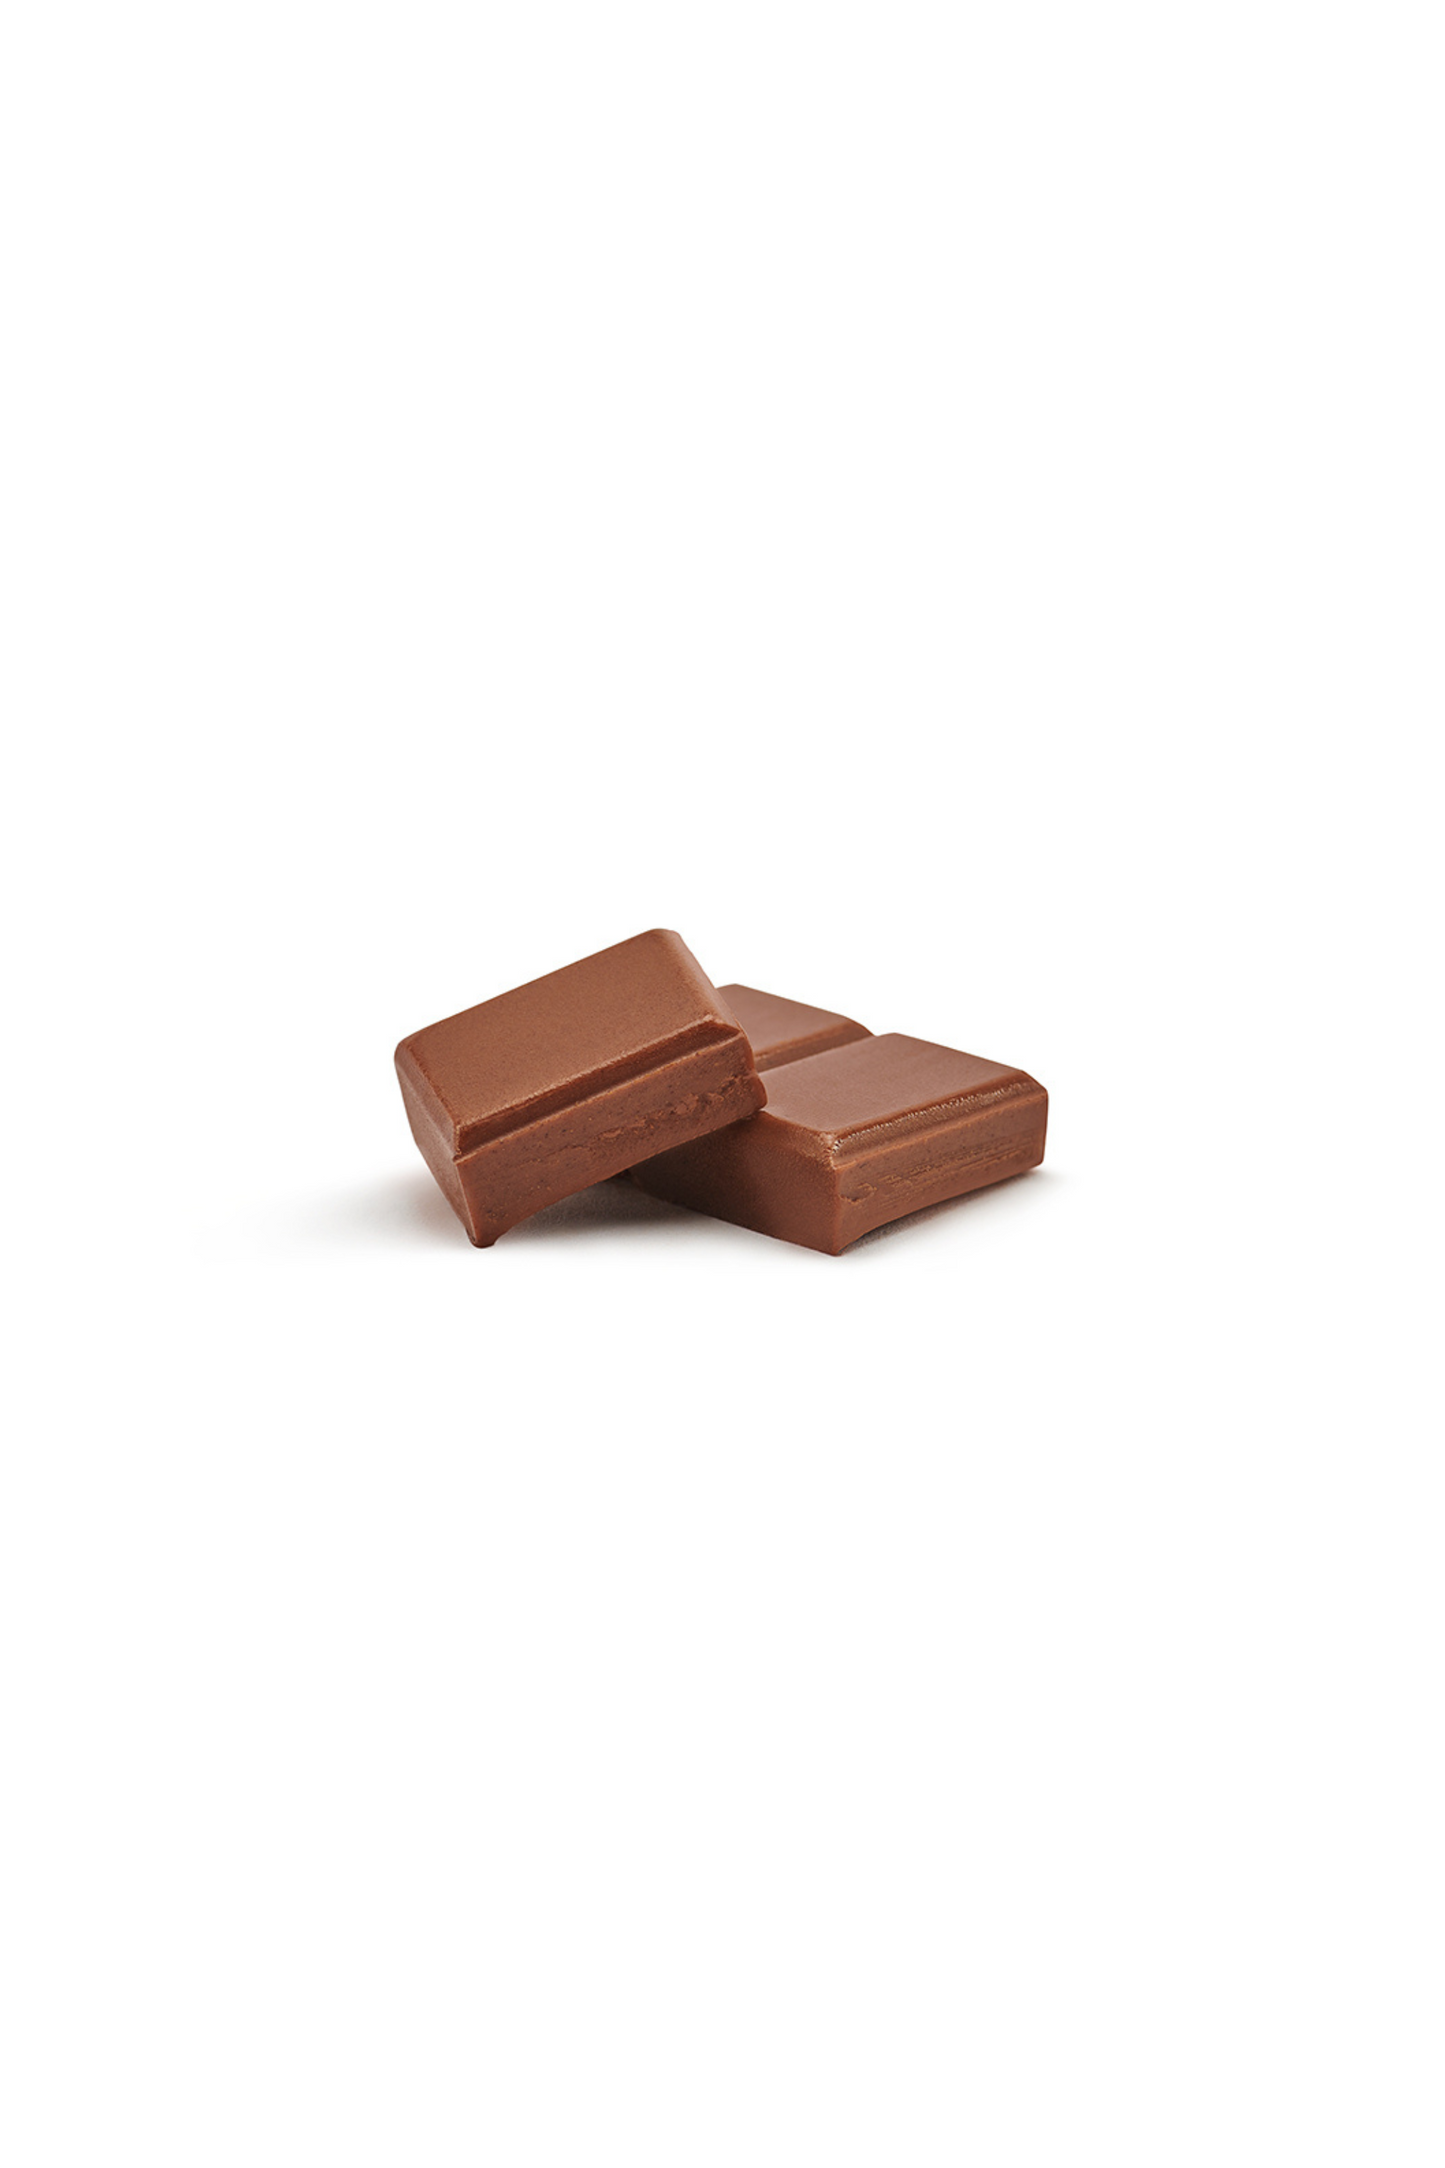 Bean -to-Bar. Cappuccino milk chocolate, with no added sugar. 43% cocoa content